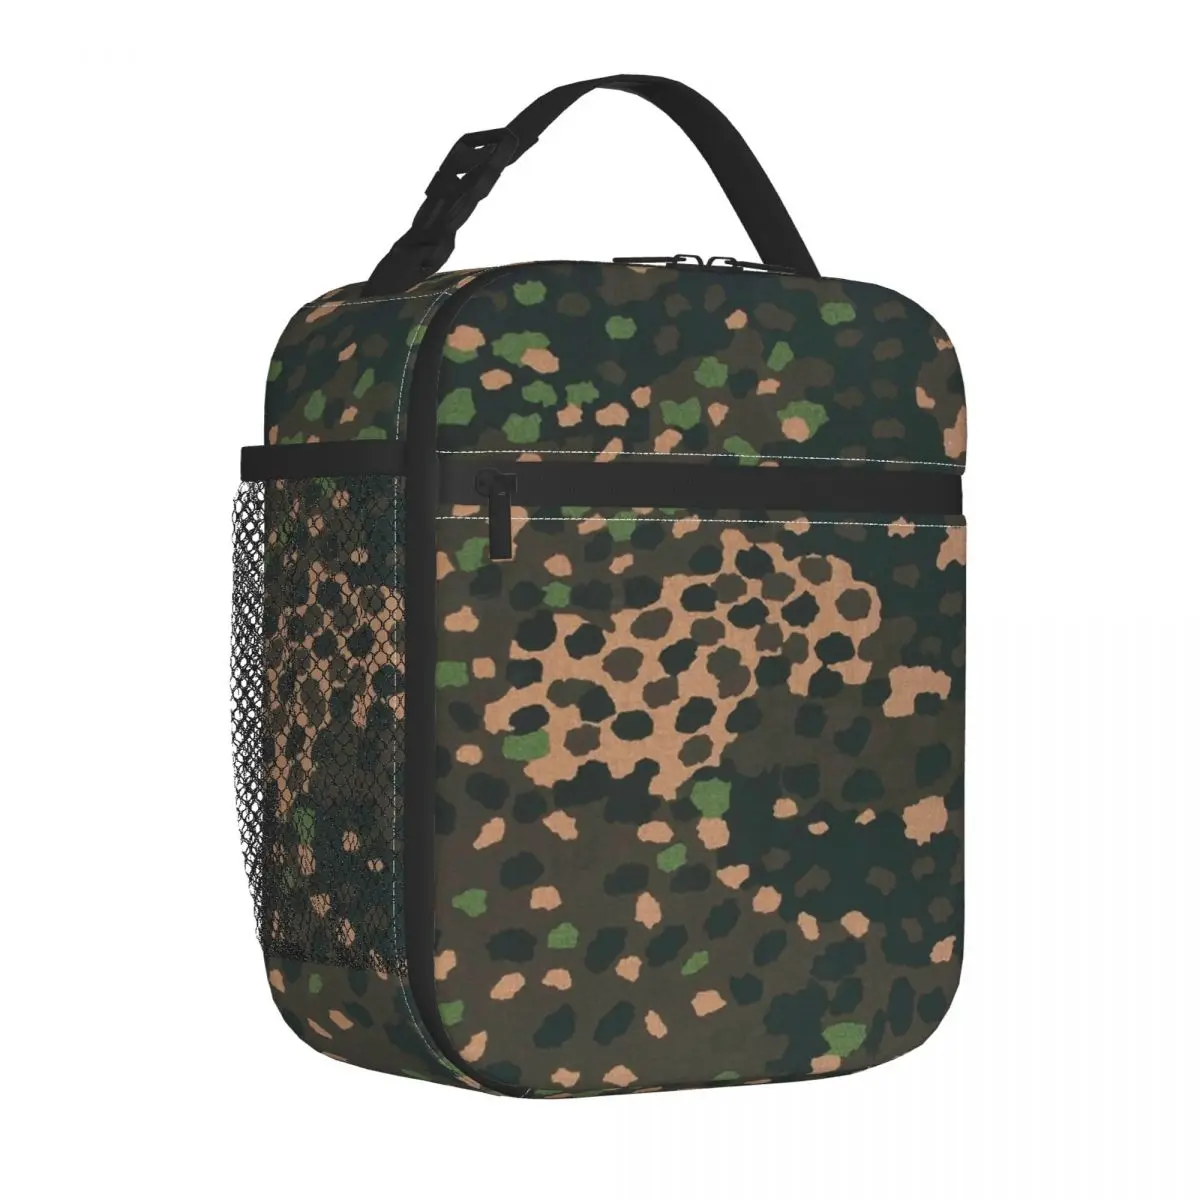 

Pea Dot Camo Insulated Lunch Tote Bag Multicam Military Food Box Portable Thermal Cooler Bento Box School